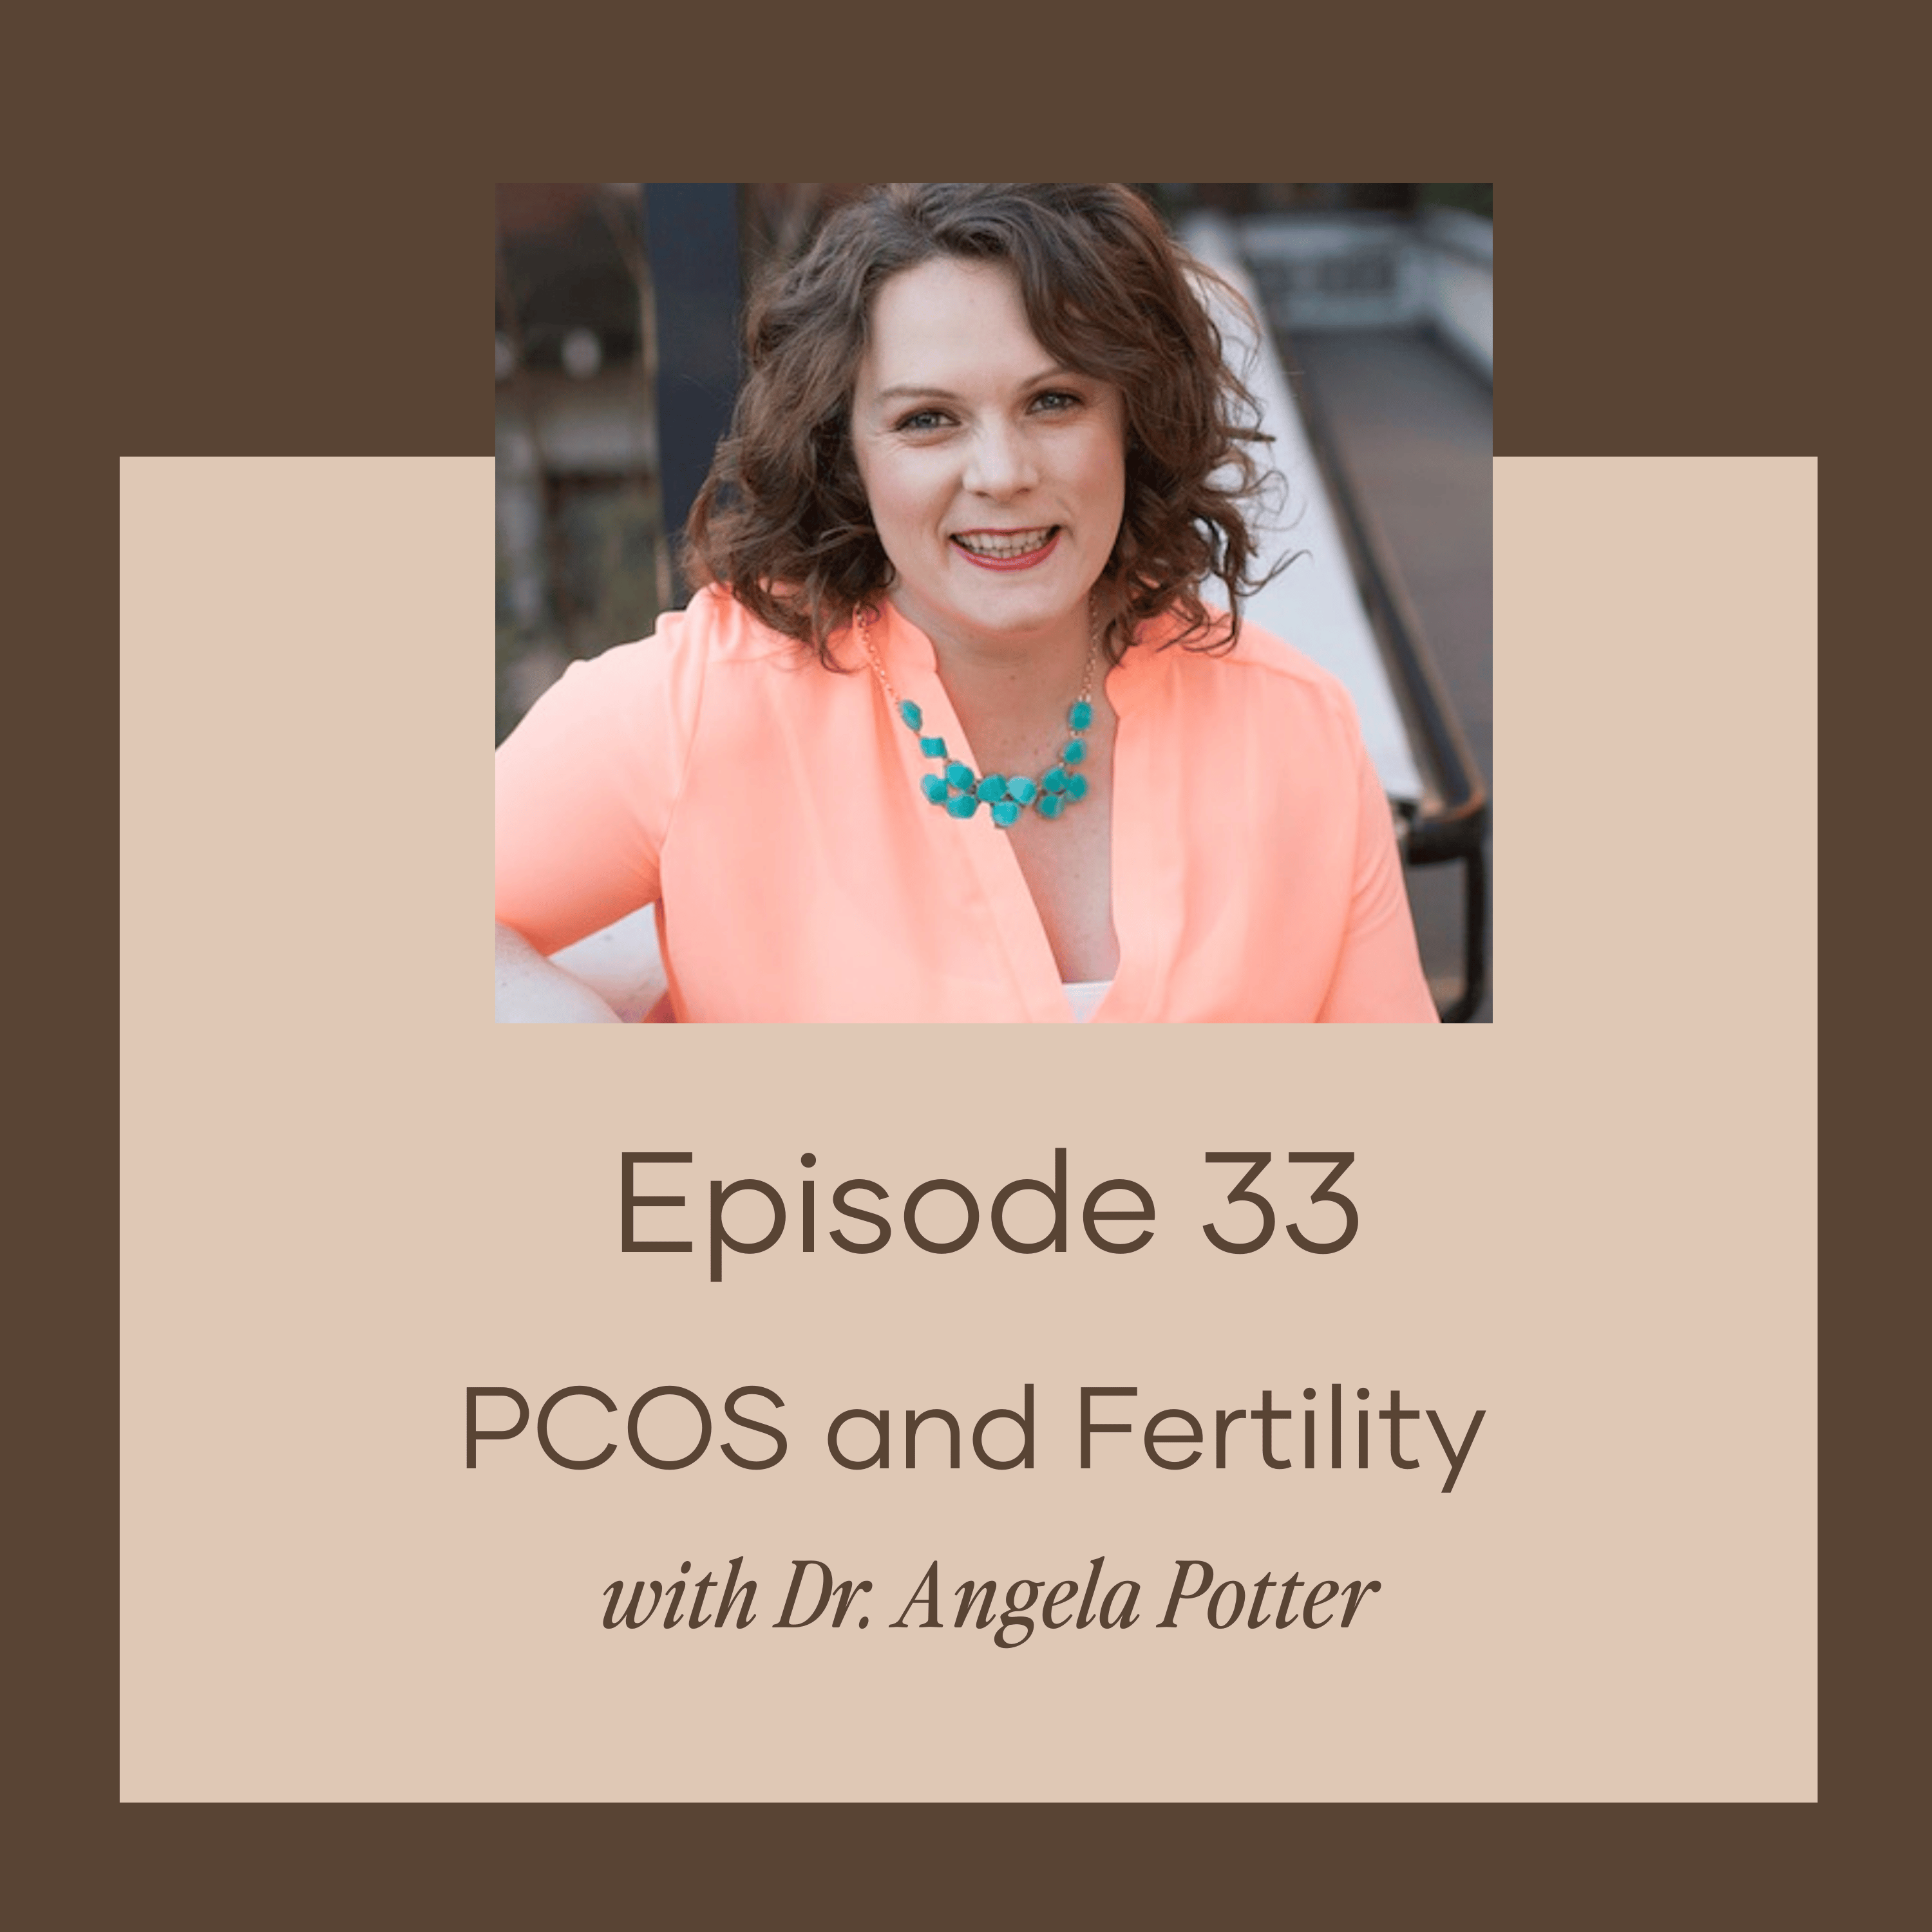 PCOS and Fertility with Dr. Angela Potter 